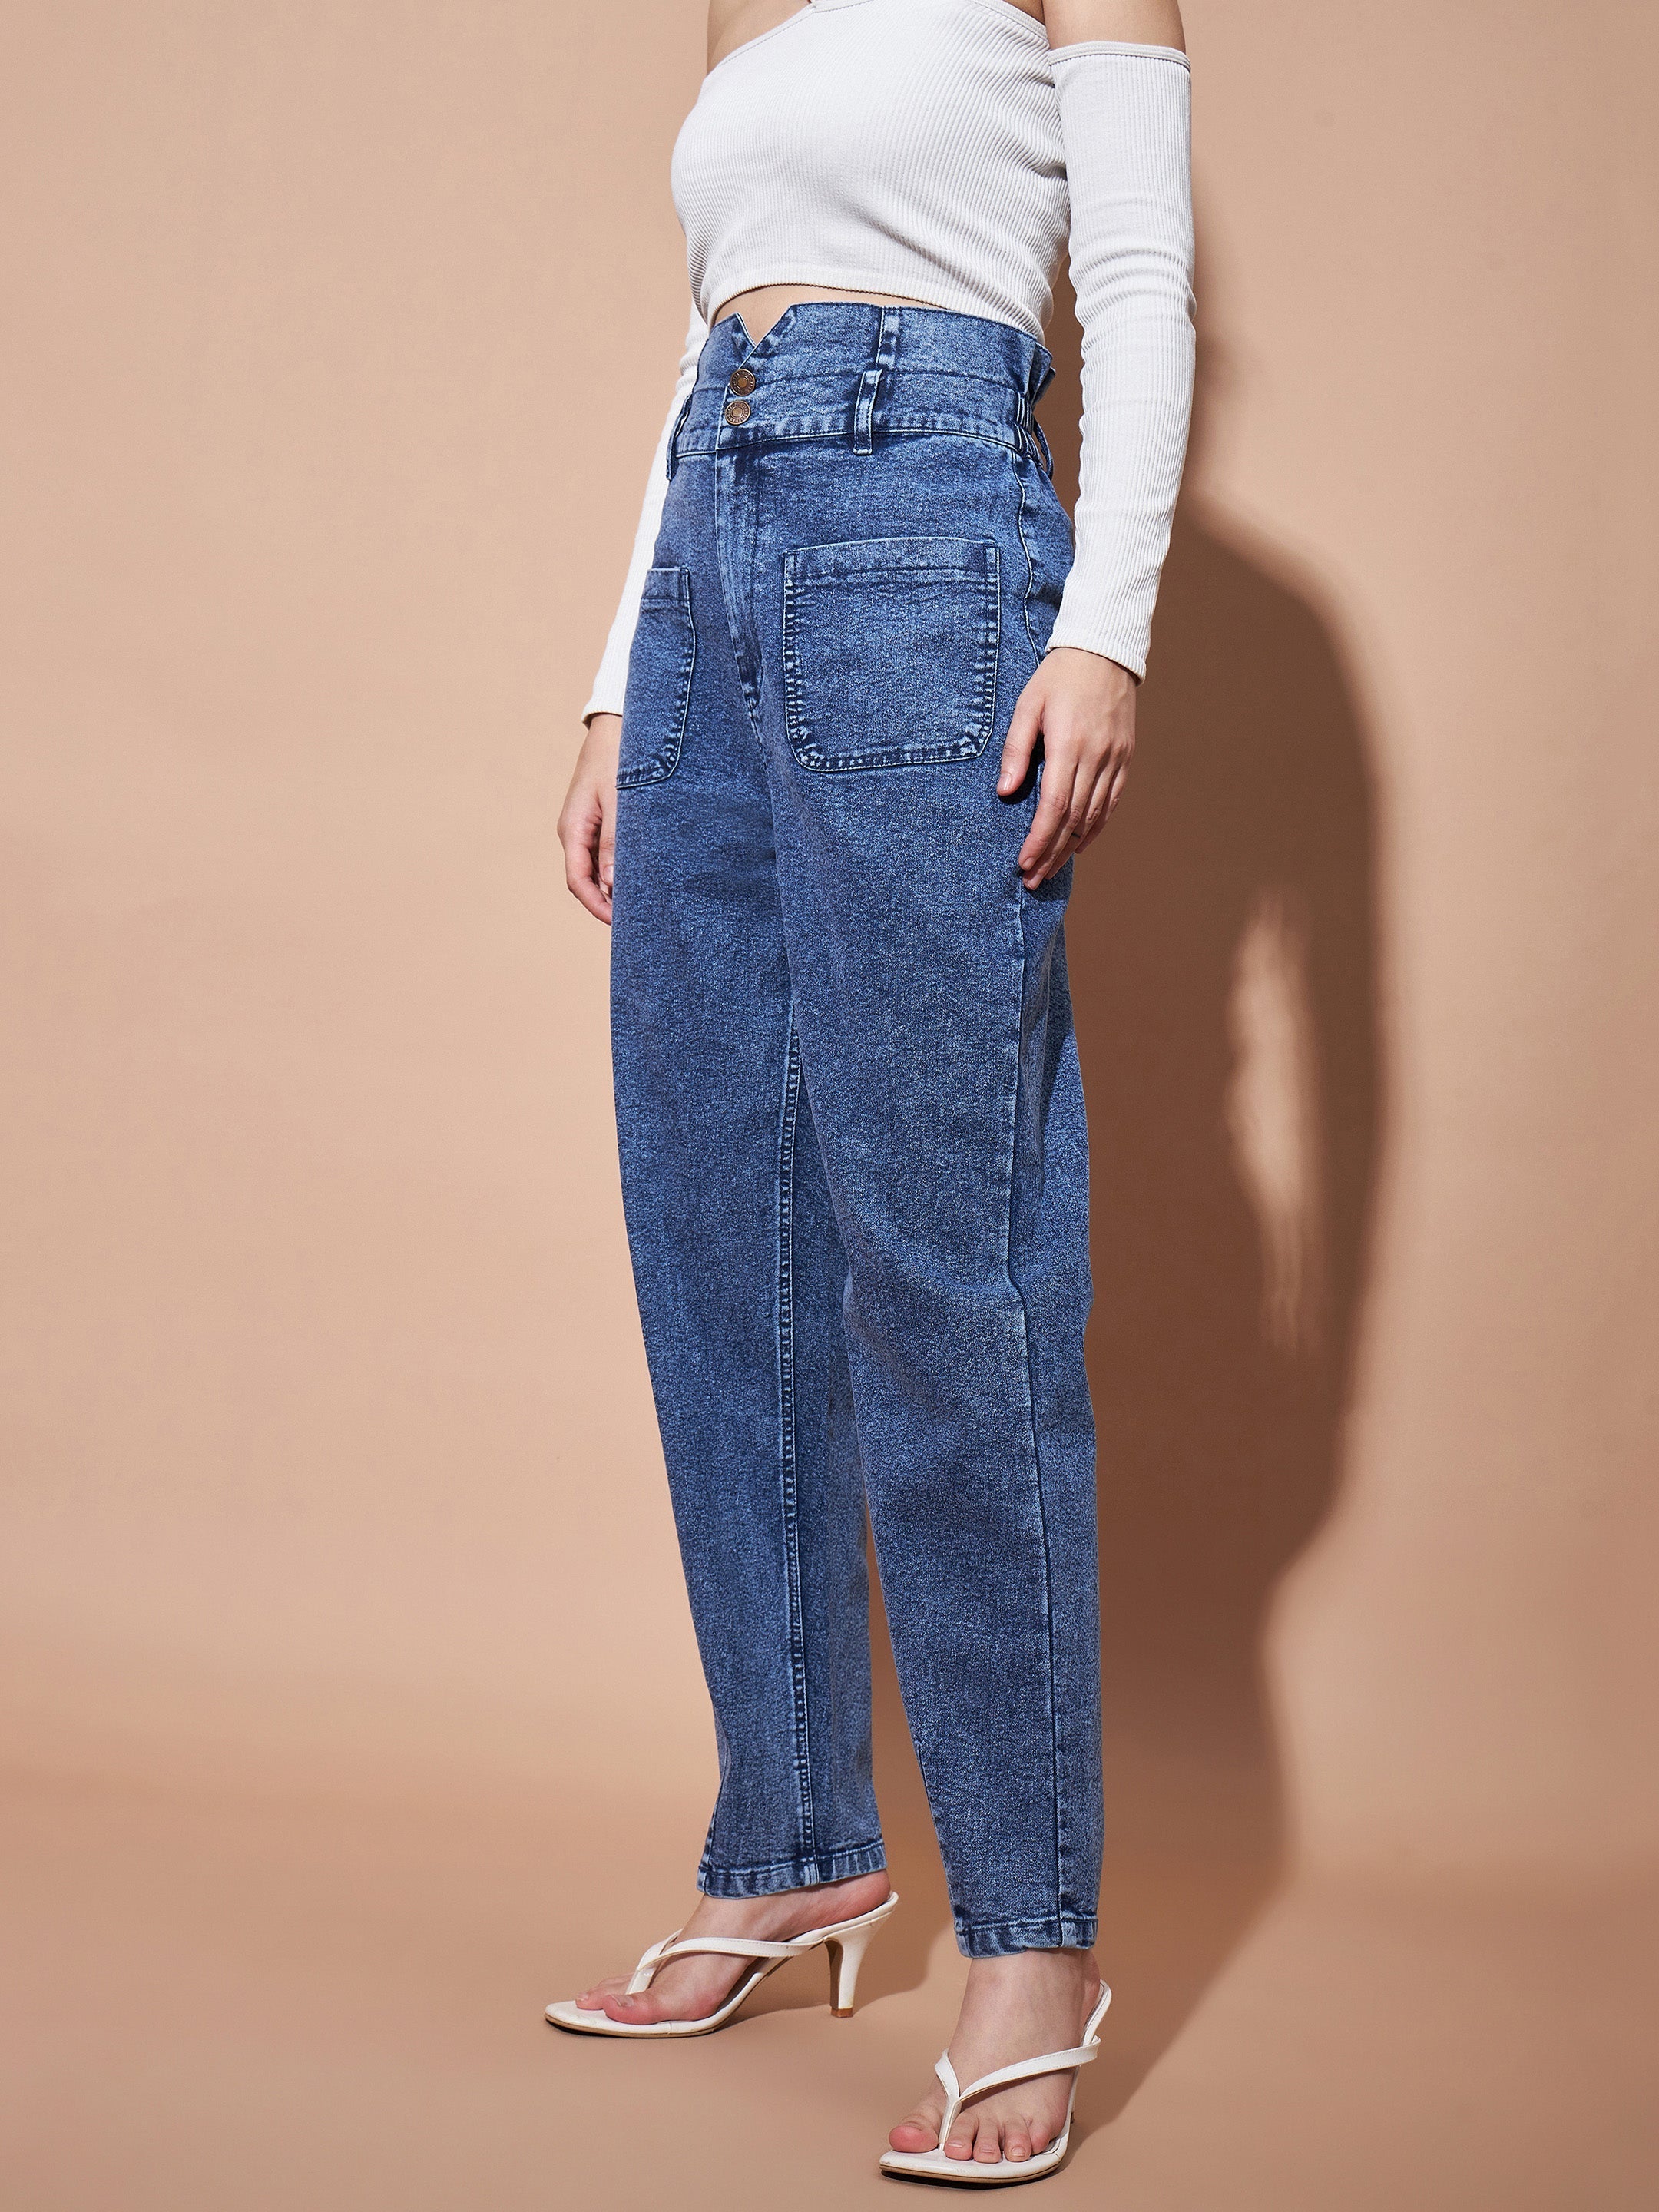 baggy jeans price